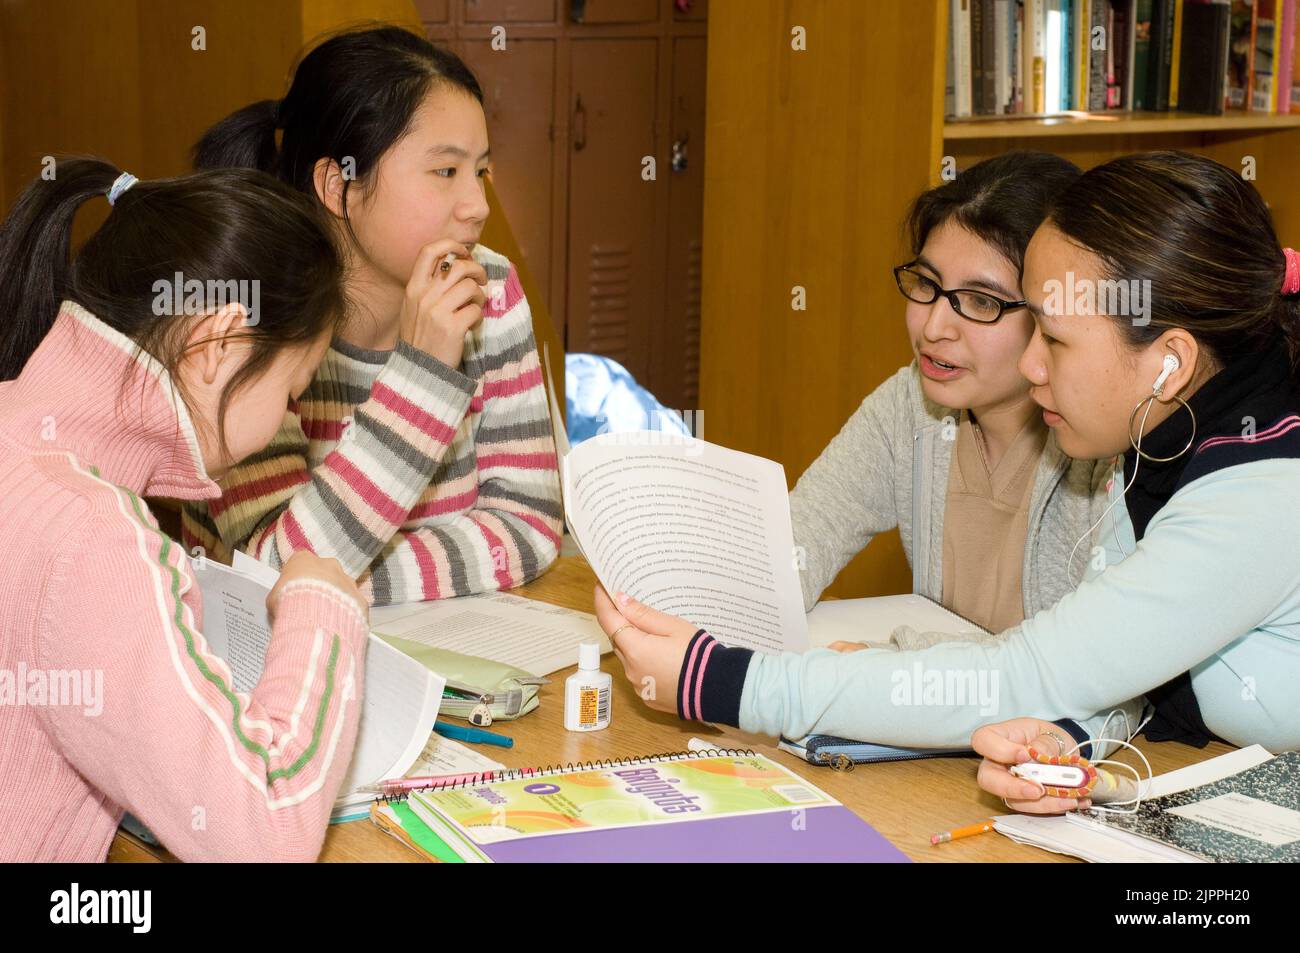 Public School High School group of female students discussing a paper, sitting at table in classroom Stock Photo